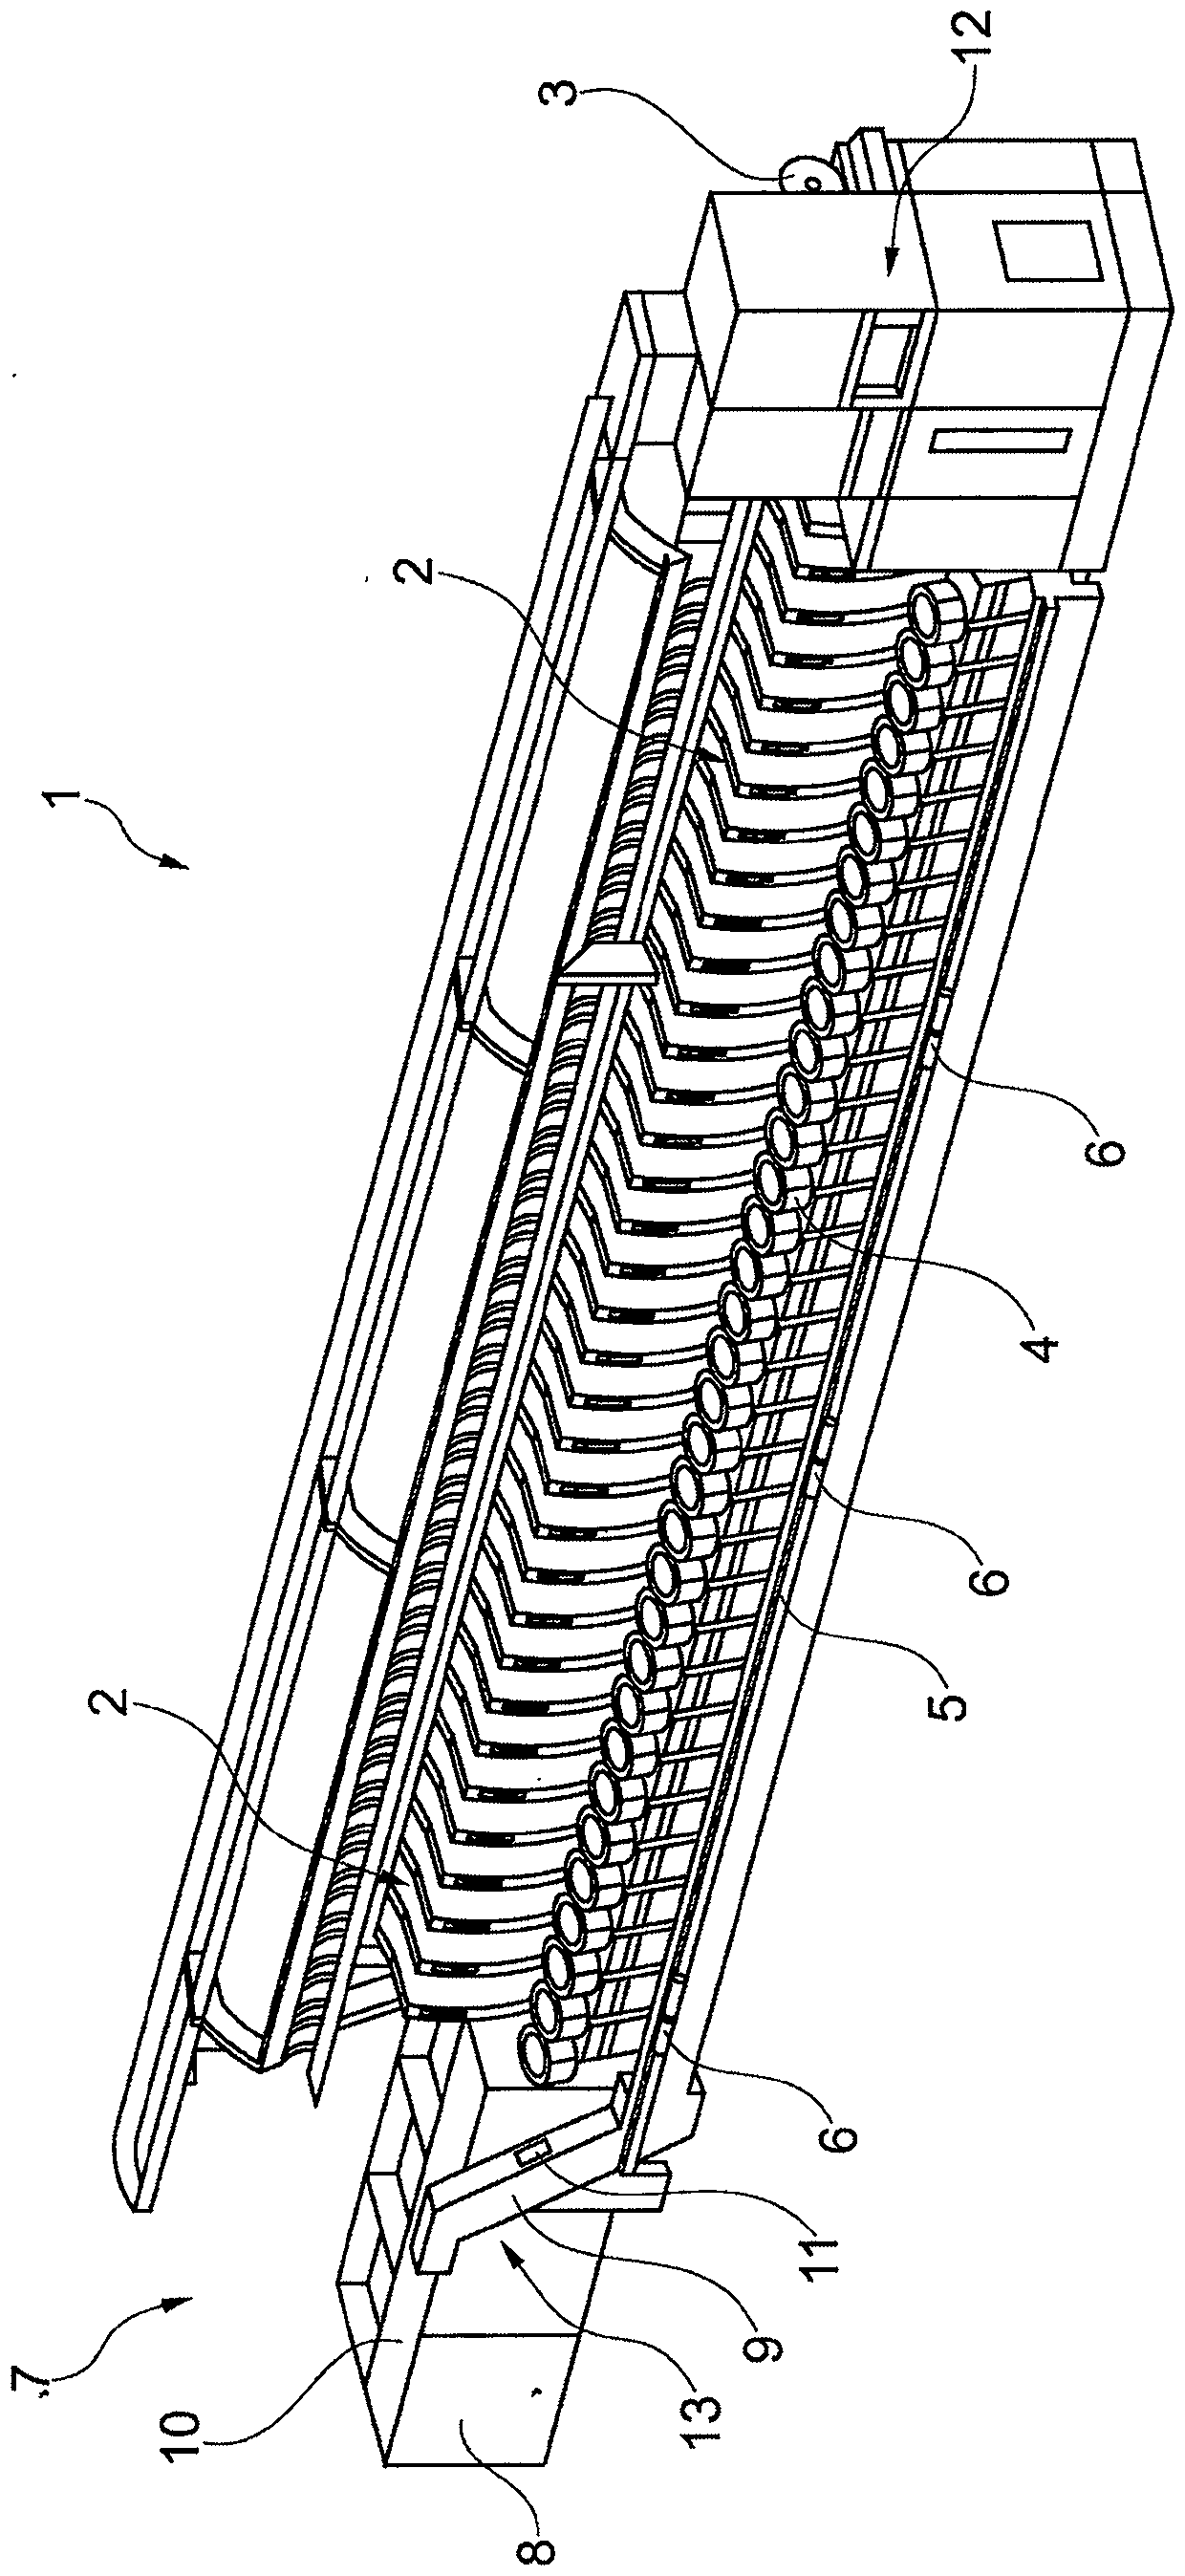 Detection device for detecting yarn residues on spinning bobbins